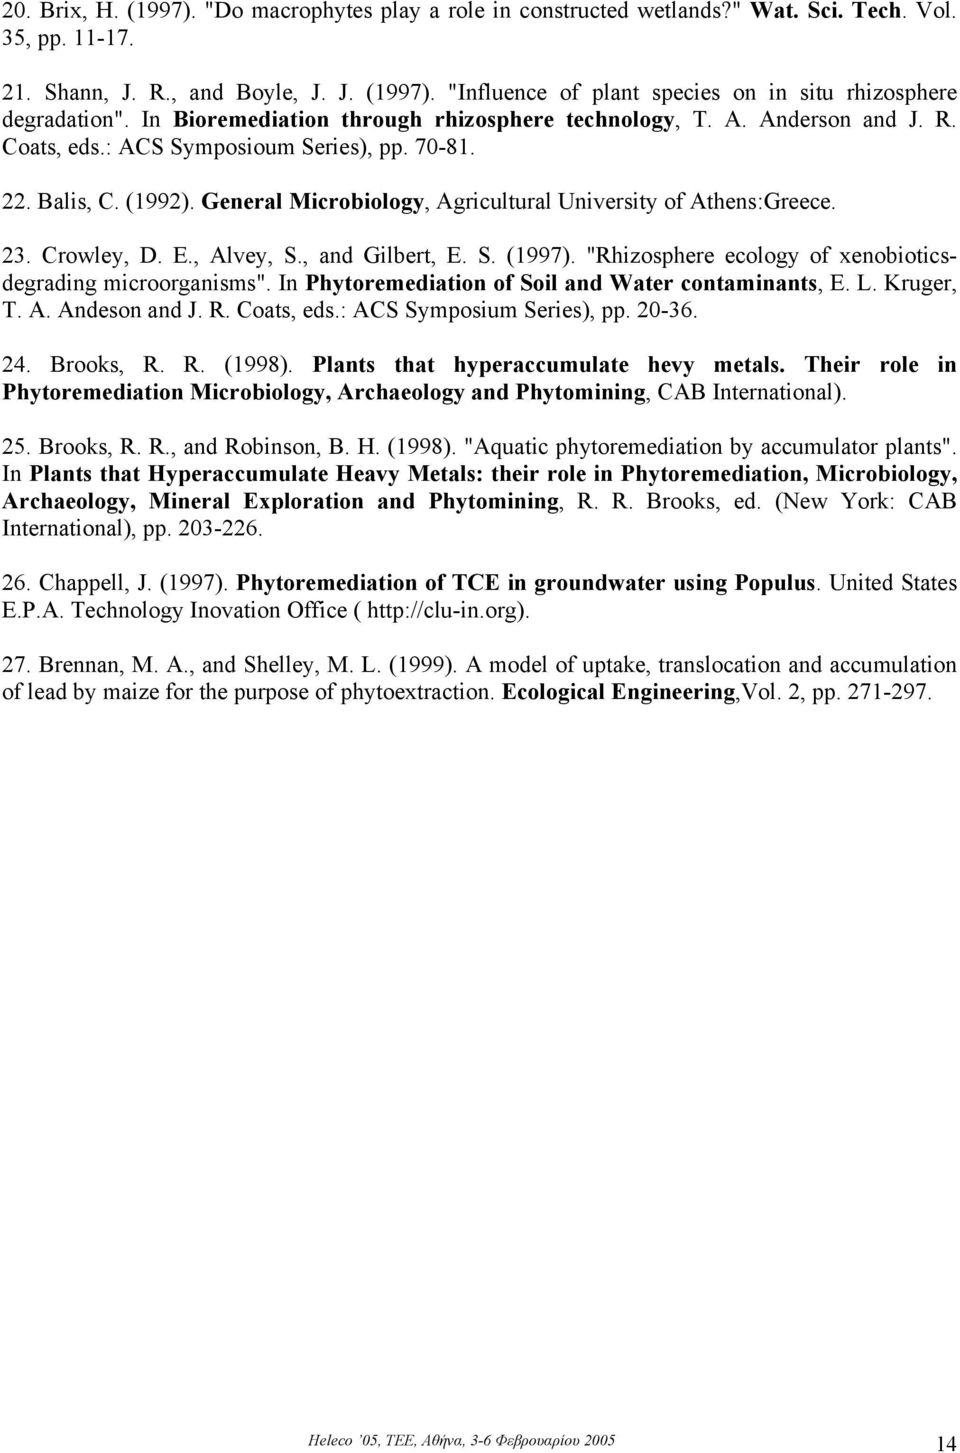 General Microbiology, Agricultural University of Athens:Greece. 23. Crowley, D. E., Alvey, S., and Gilbert, E. S. (1997). "Rhizosphere ecology of xenobioticsdegrading microorganisms".